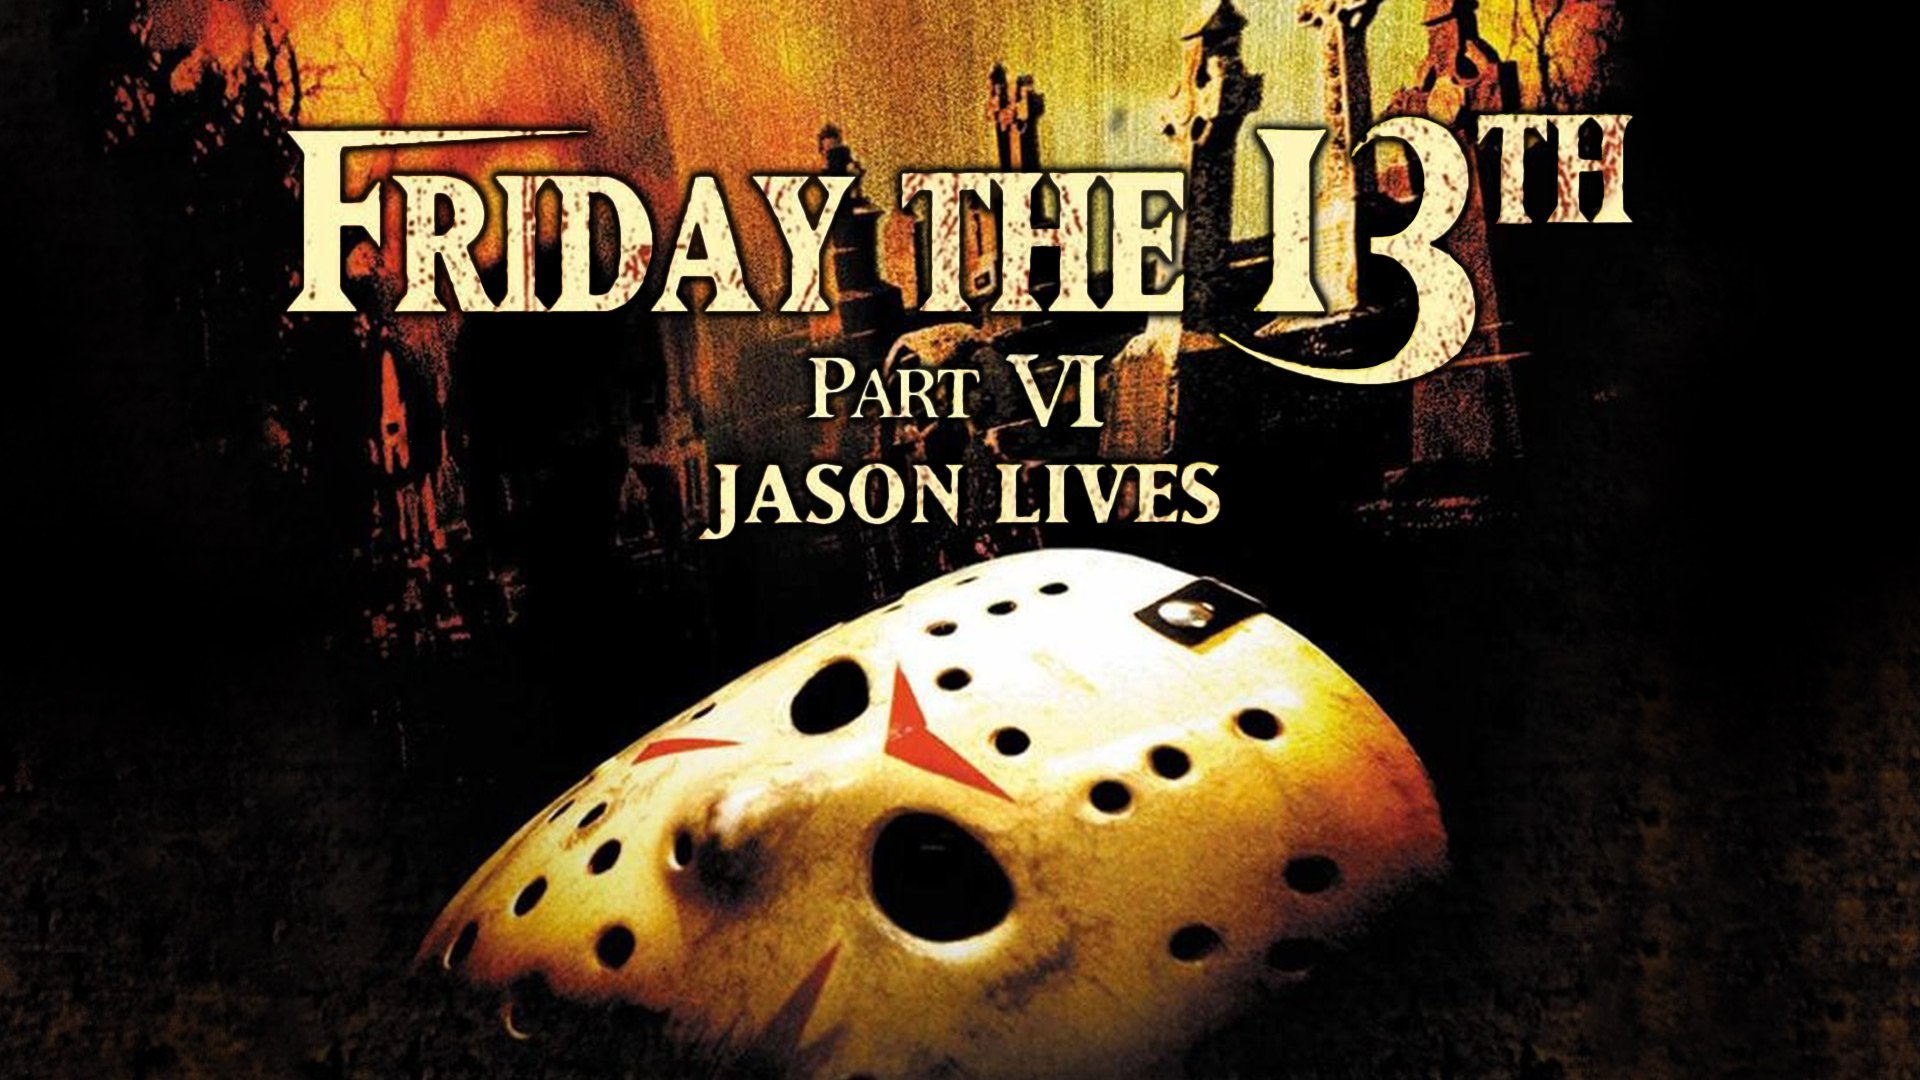 37-facts-about-the-movie-jason-lives-friday-the-13th-part-vi